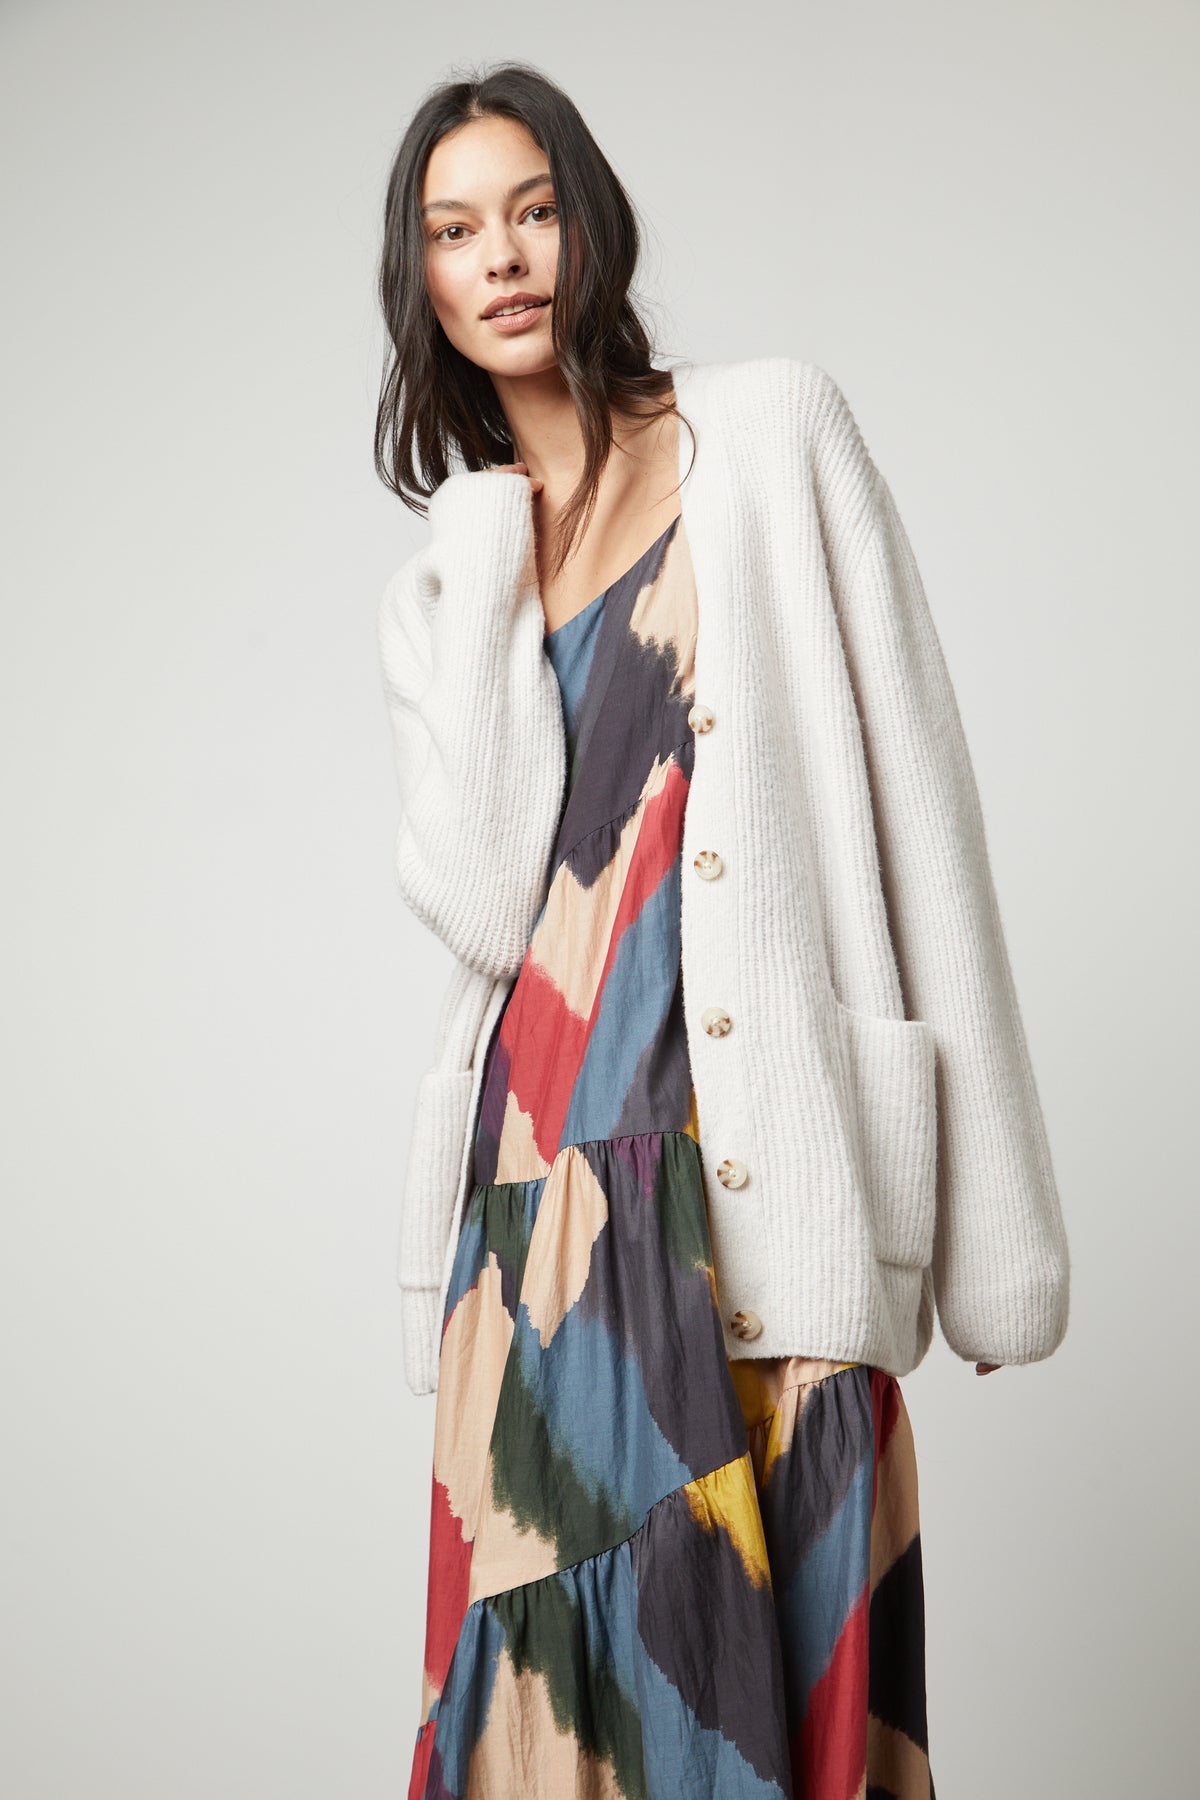   The model is wearing a multicolored dress and a Velvet by Graham & Spencer BRITT OVERSIZED CARDIGAN. 